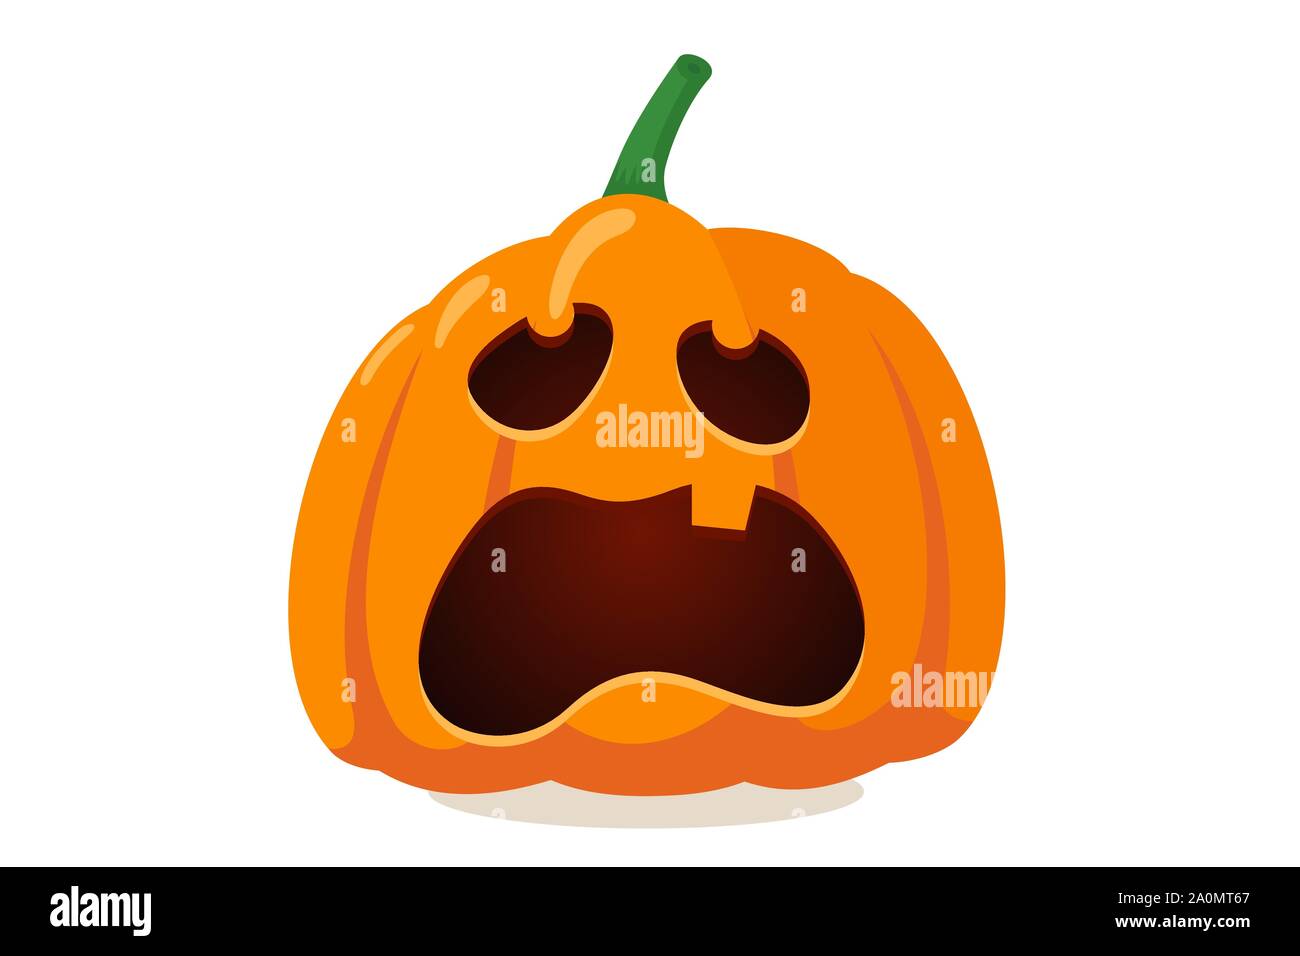 Funny scary spooky smile pumpkin jack o lantern with creepy tooths. Traditional decoration symbol of autumn happy halloween holiday celebration. Vector horror illustration isolated on white background Stock Vector